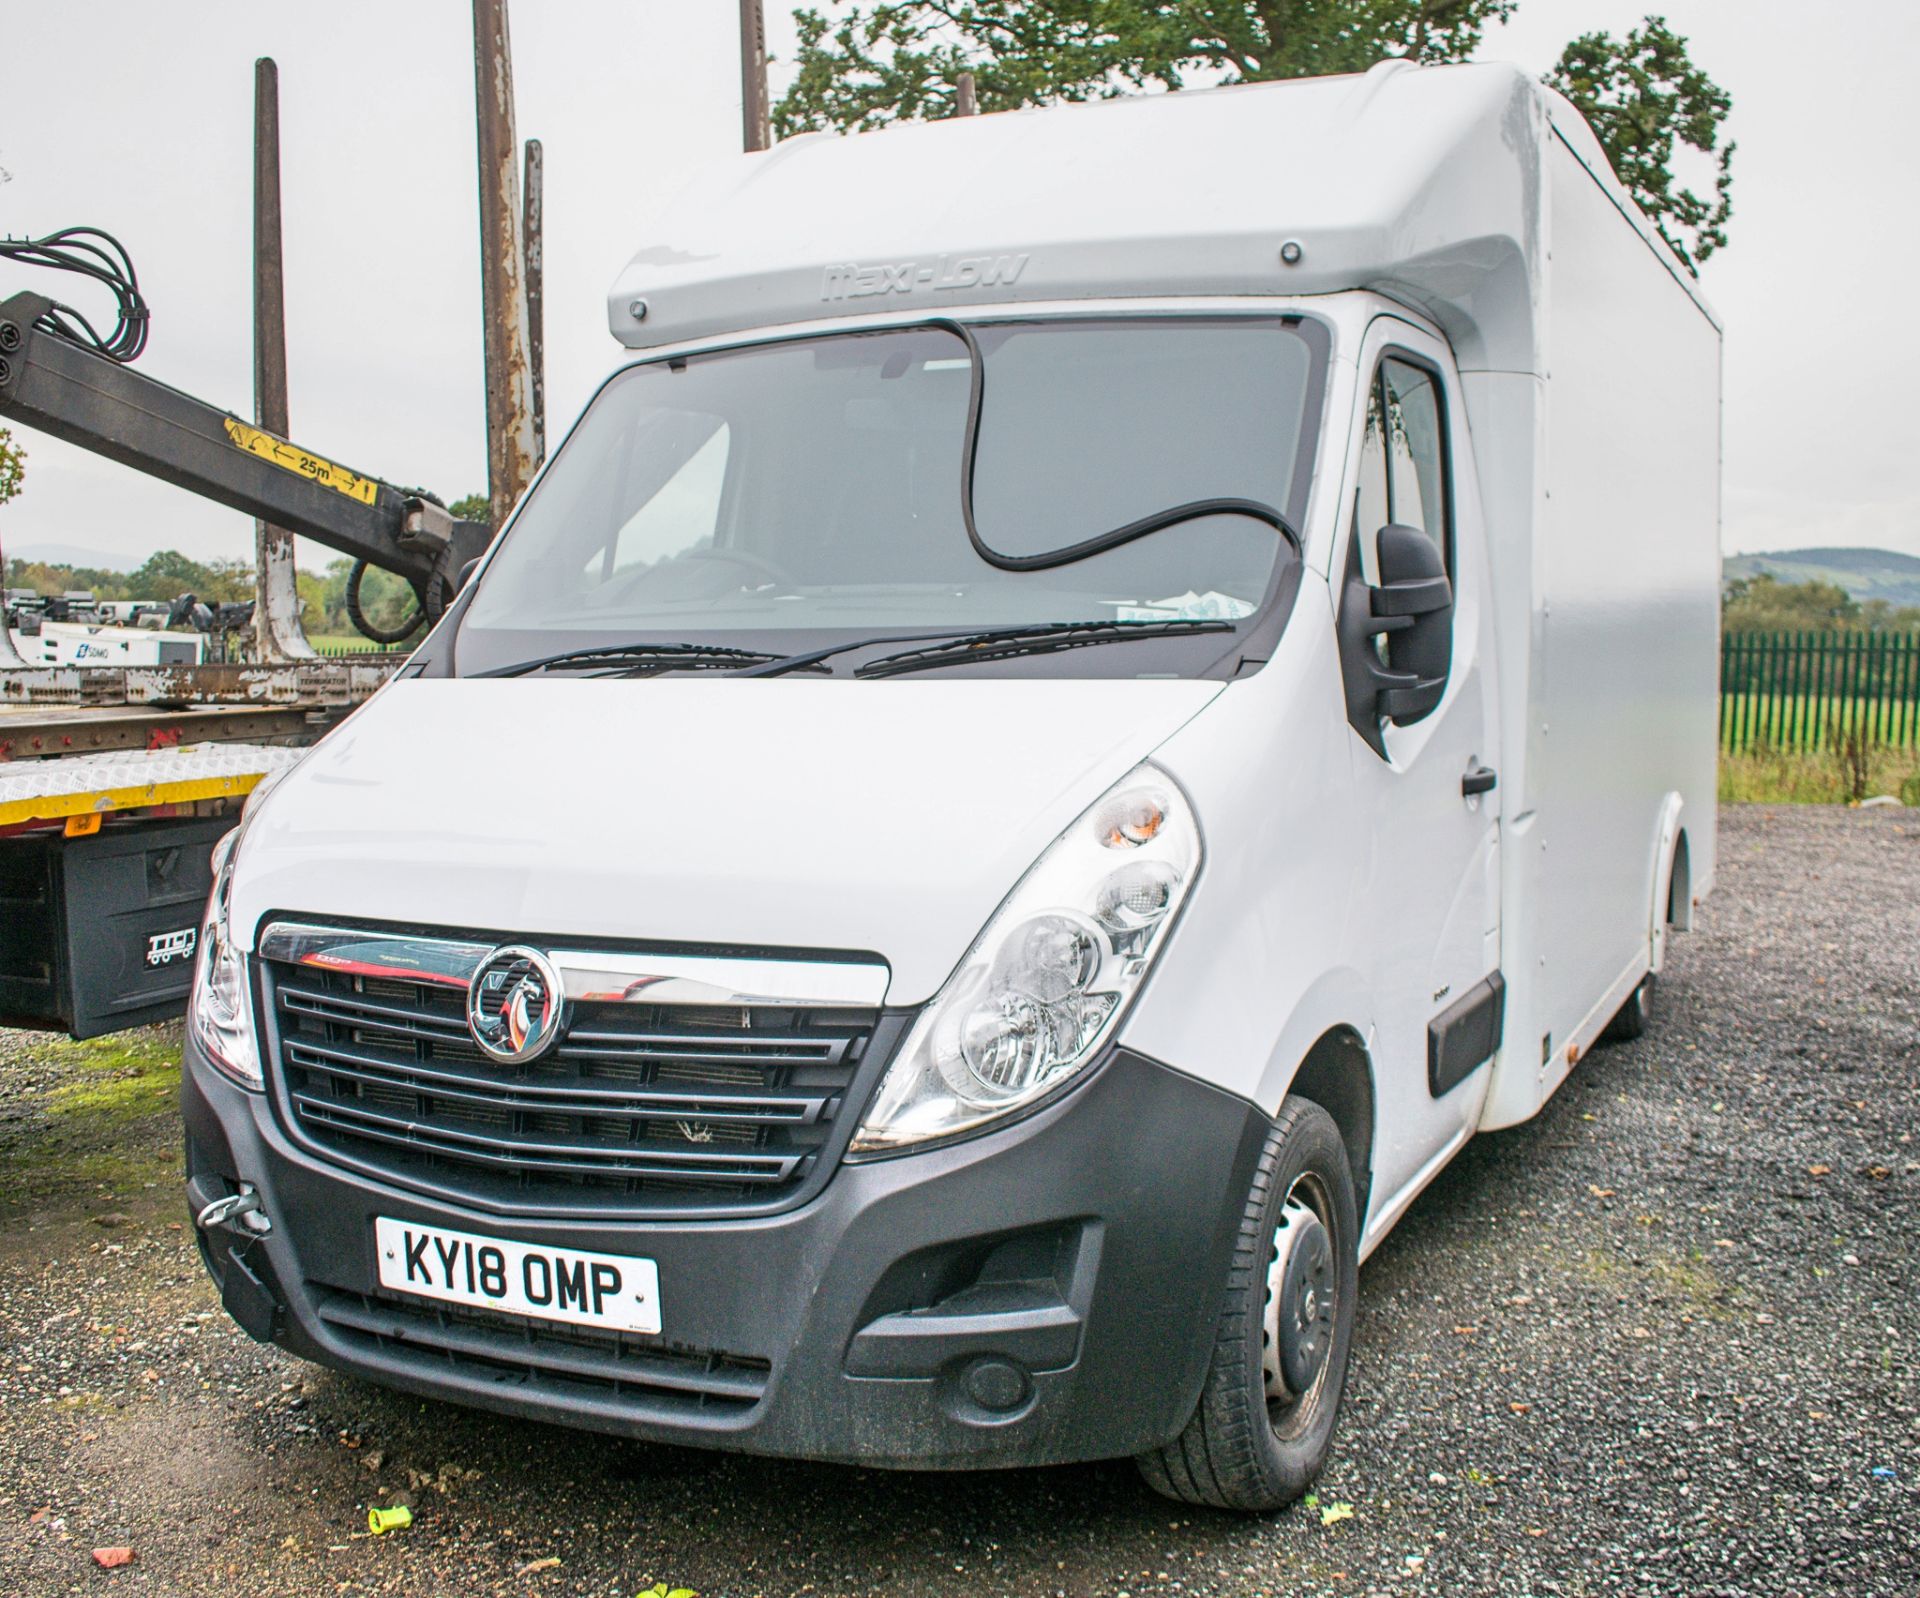 Vauxhall Movano F3500 Maxi-Low box van  Registration Number: KY18 OMP Date of Registration: March